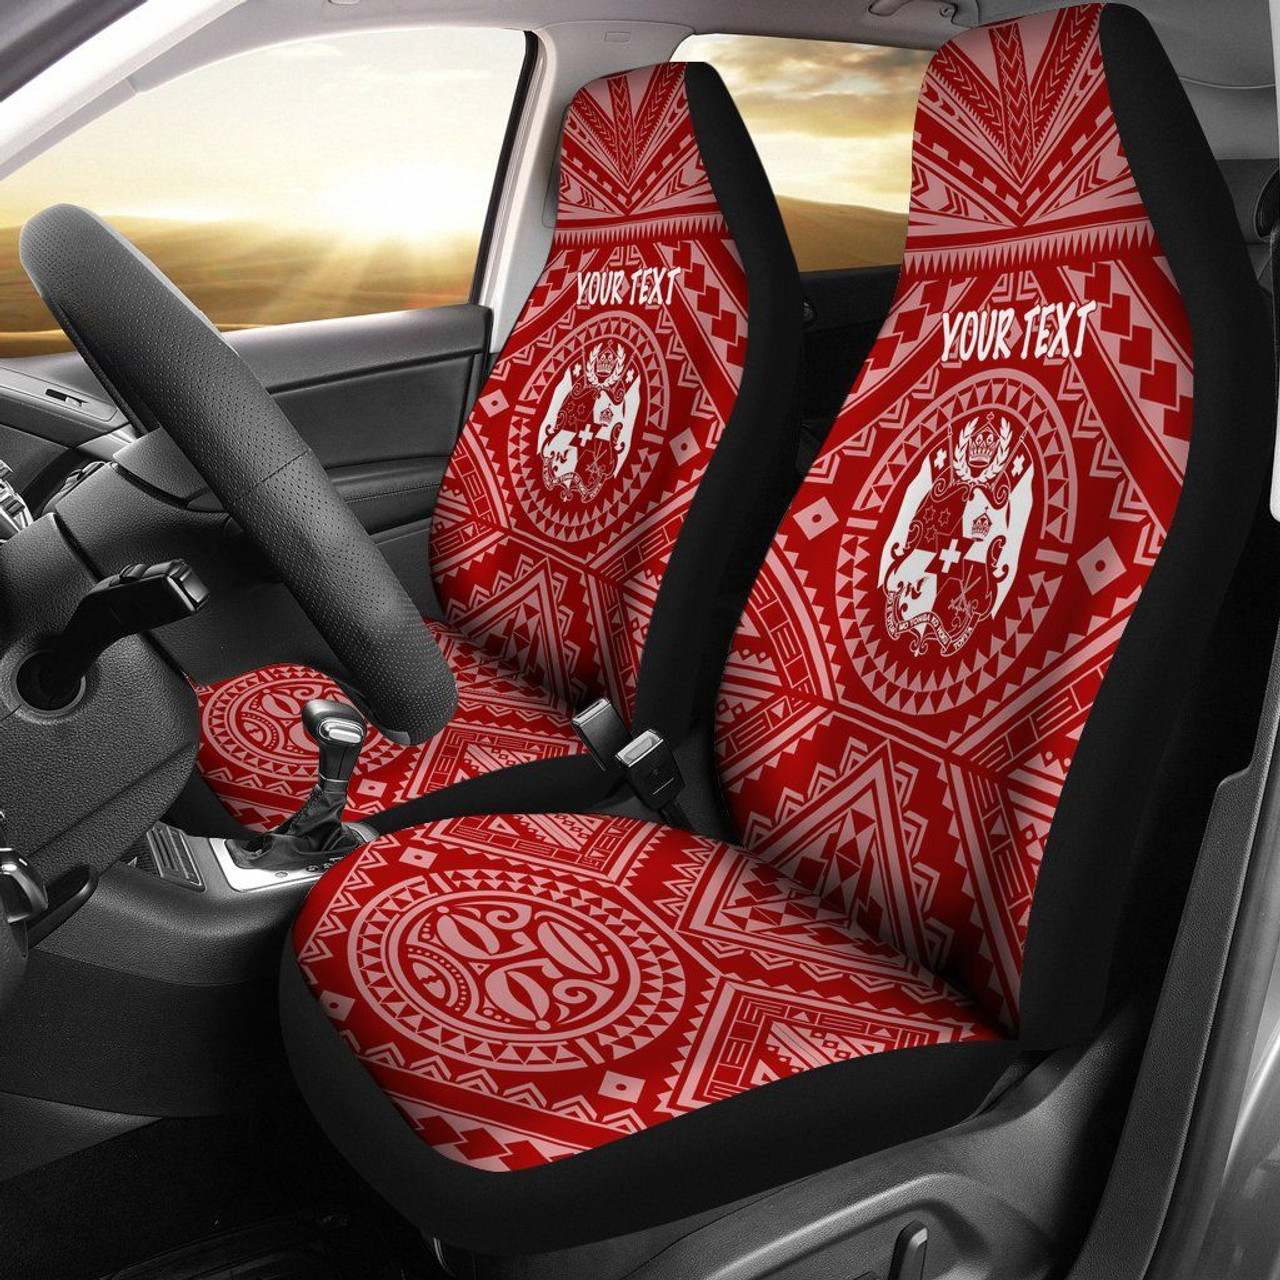 Tonga Personalised Car Seat Covers - Tonga Seal With Polynesian Tattoo Style (Red)